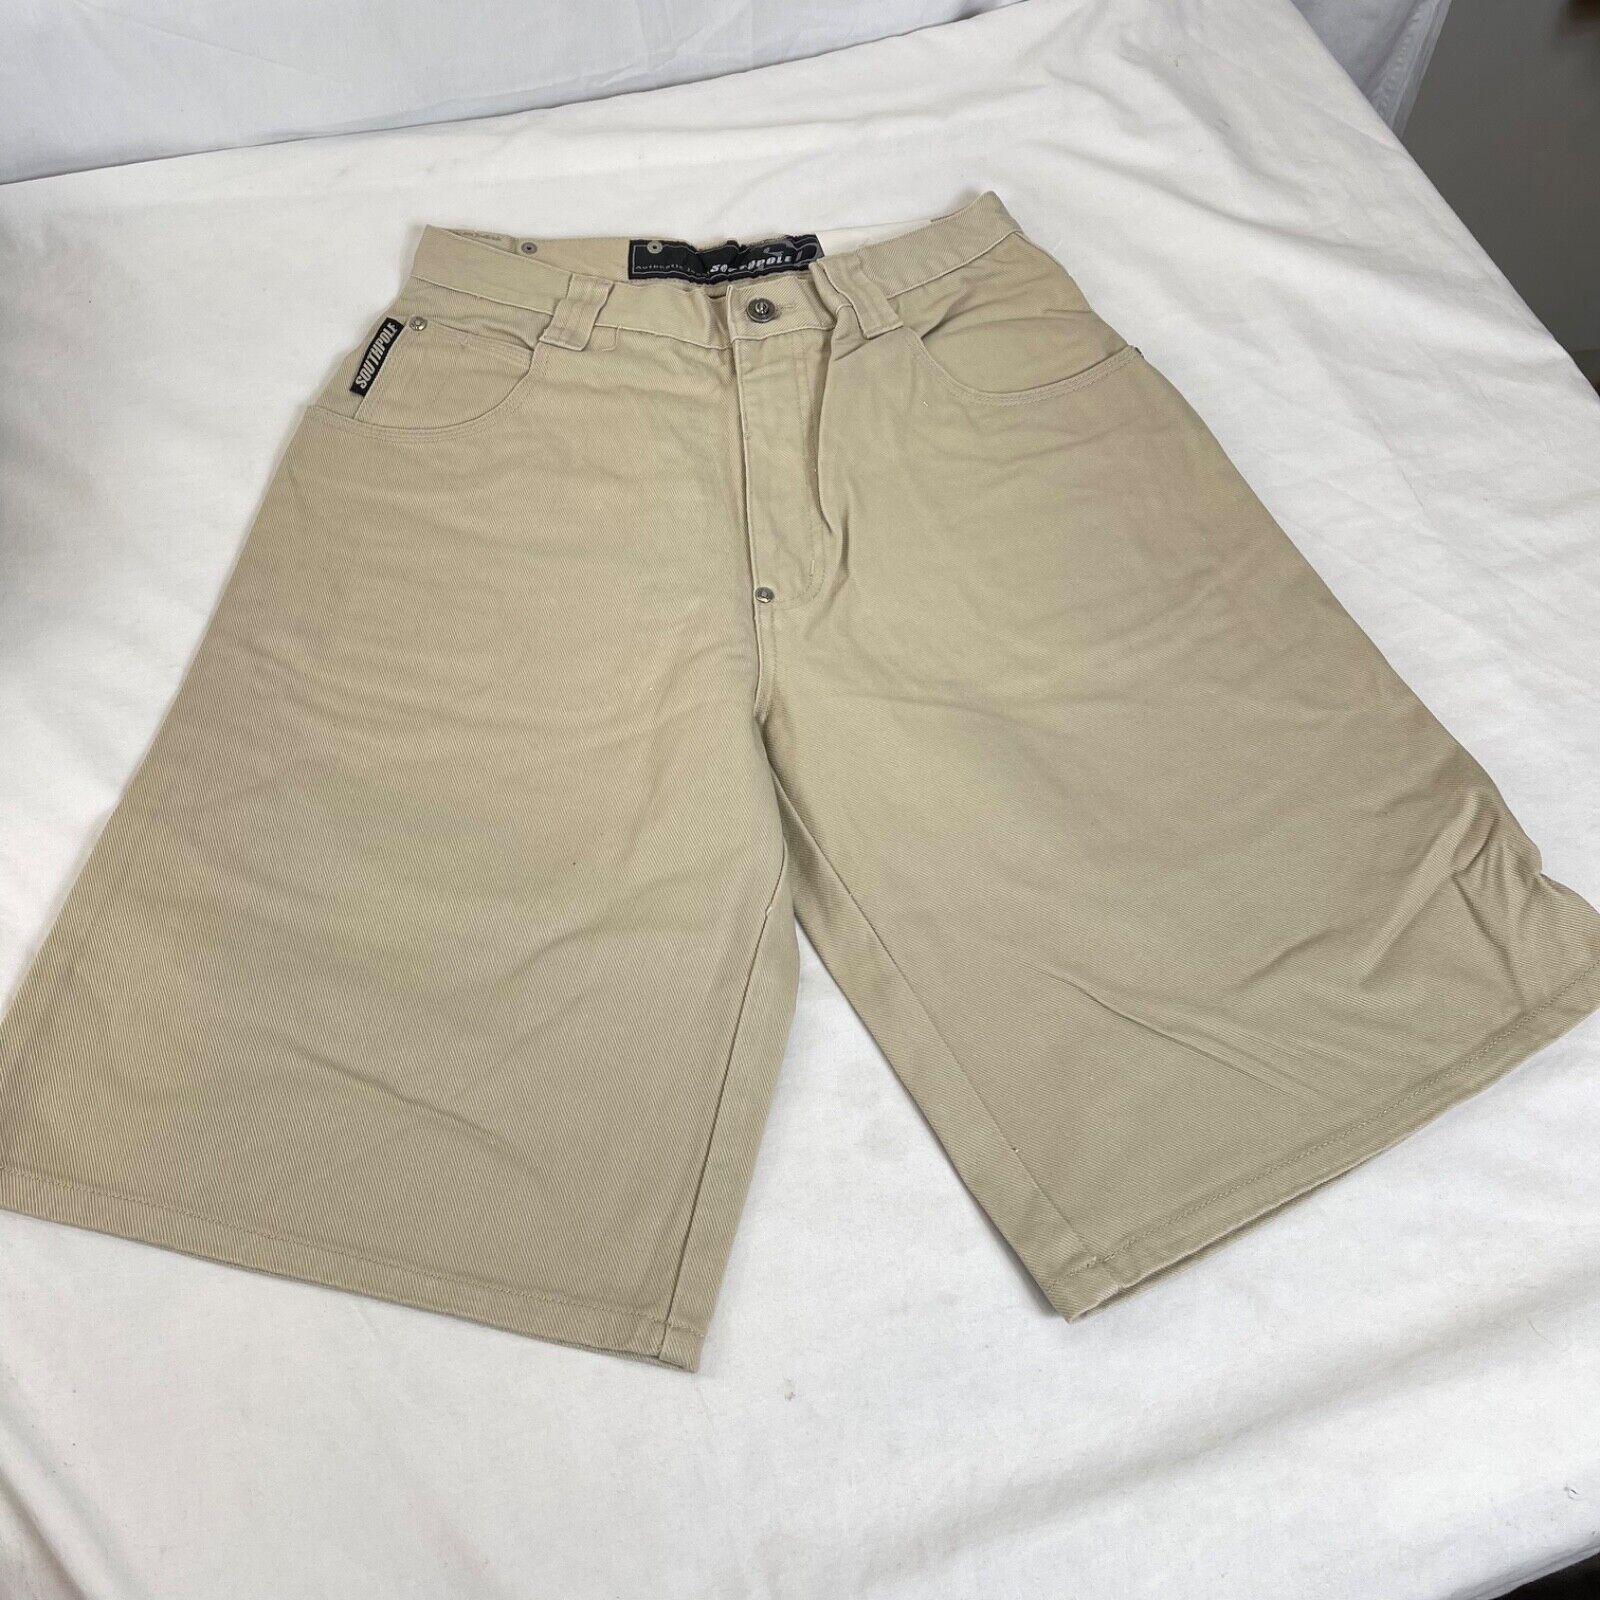 Primary image for NWT - SOUTHPOLE Carpenter Khaki Tan Denim Jeans Shorts - Baggy